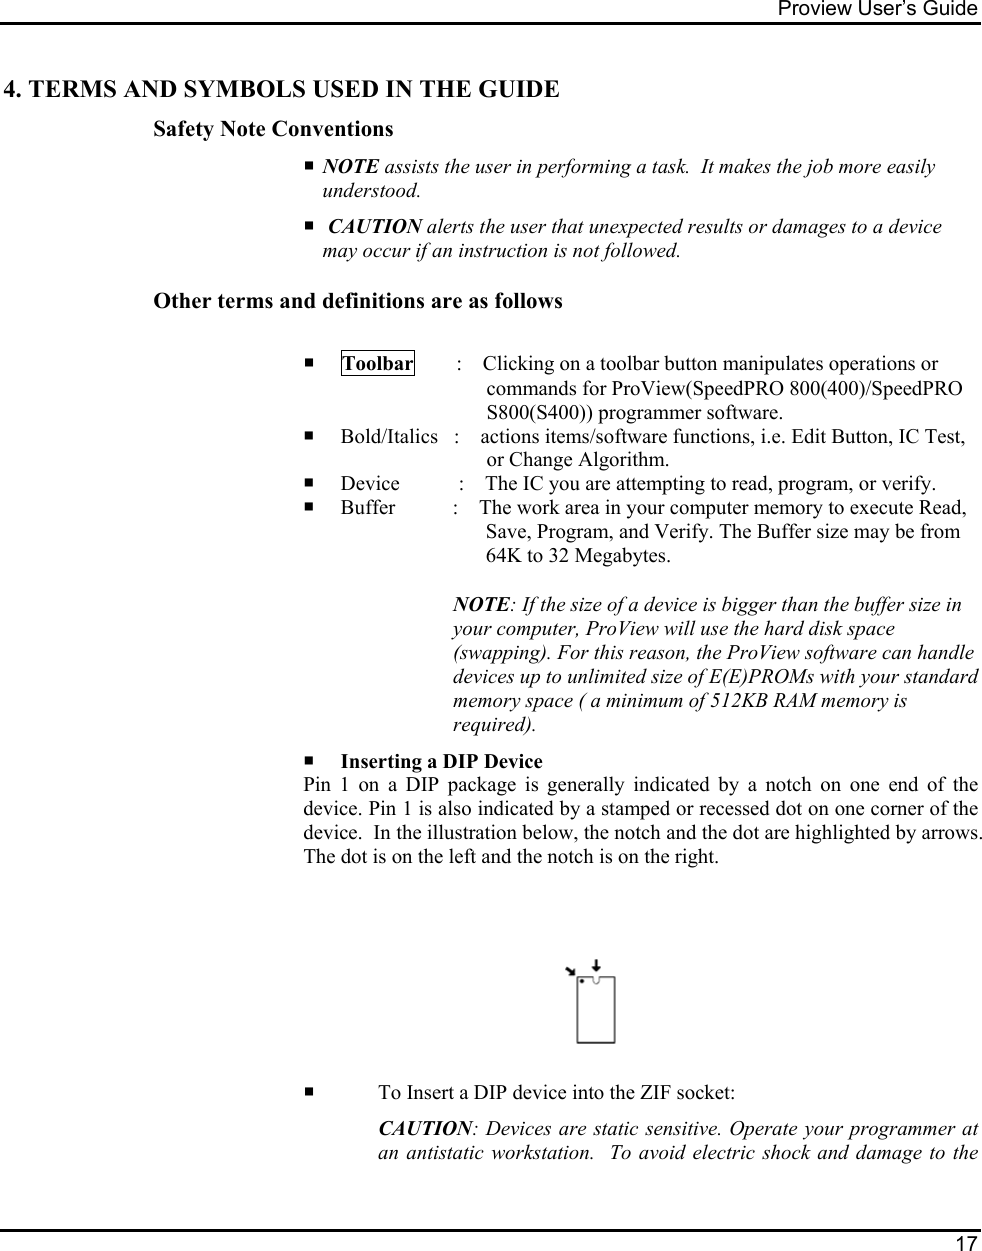 Proview User’s Guide  17  4. TERMS AND SYMBOLS USED IN THE GUIDE Safety Note Conventions    NOTE assists the user in performing a task.  It makes the job more easily understood.    CAUTION alerts the user that unexpected results or damages to a device may occur if an instruction is not followed.   Other terms and definitions are as follows      Toolbar        :    Clicking on a toolbar button manipulates operations or commands for ProView(SpeedPRO 800(400)/SpeedPRO S800(S400)) programmer software.     Bold/Italics   :    actions items/software functions, i.e. Edit Button, IC Test, or Change Algorithm.    Device   :    The IC you are attempting to read, program, or verify.    Buffer           :    The work area in your computer memory to execute Read, Save, Program, and Verify. The Buffer size may be from 64K to 32 Megabytes. NOTE: If the size of a device is bigger than the buffer size in your computer, ProView will use the hard disk space (swapping). For this reason, the ProView software can handle devices up to unlimited size of E(E)PROMs with your standard memory space ( a minimum of 512KB RAM memory is required).      Inserting a DIP Device Pin 1 on a DIP package is generally indicated by a notch on one end of the device. Pin 1 is also indicated by a stamped or recessed dot on one corner of the device.  In the illustration below, the notch and the dot are highlighted by arrows. The dot is on the left and the notch is on the right.       To Insert a DIP device into the ZIF socket:  CAUTION: Devices are static sensitive. Operate your programmer at an antistatic workstation.  To avoid electric shock and damage to the 